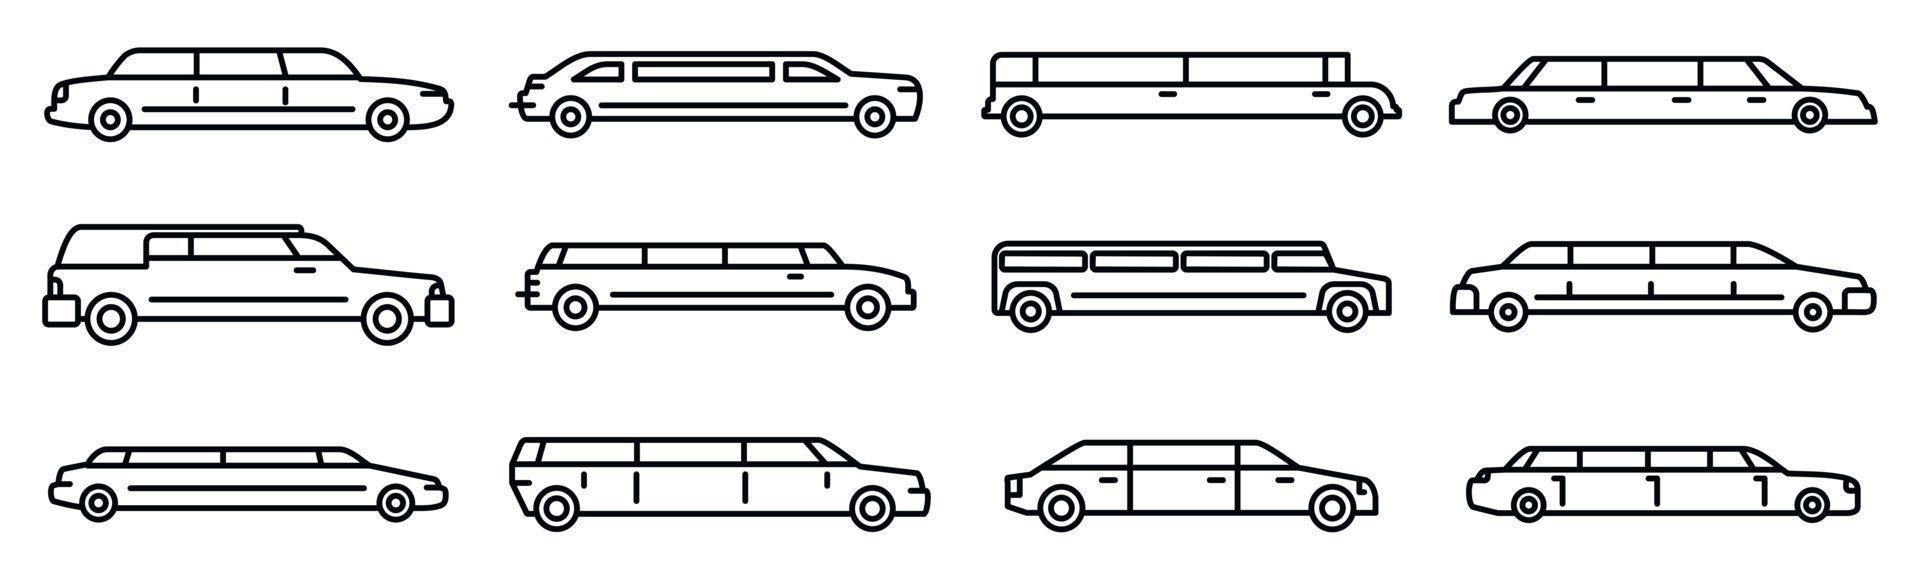 Wedding limousine icons set, outline style vector